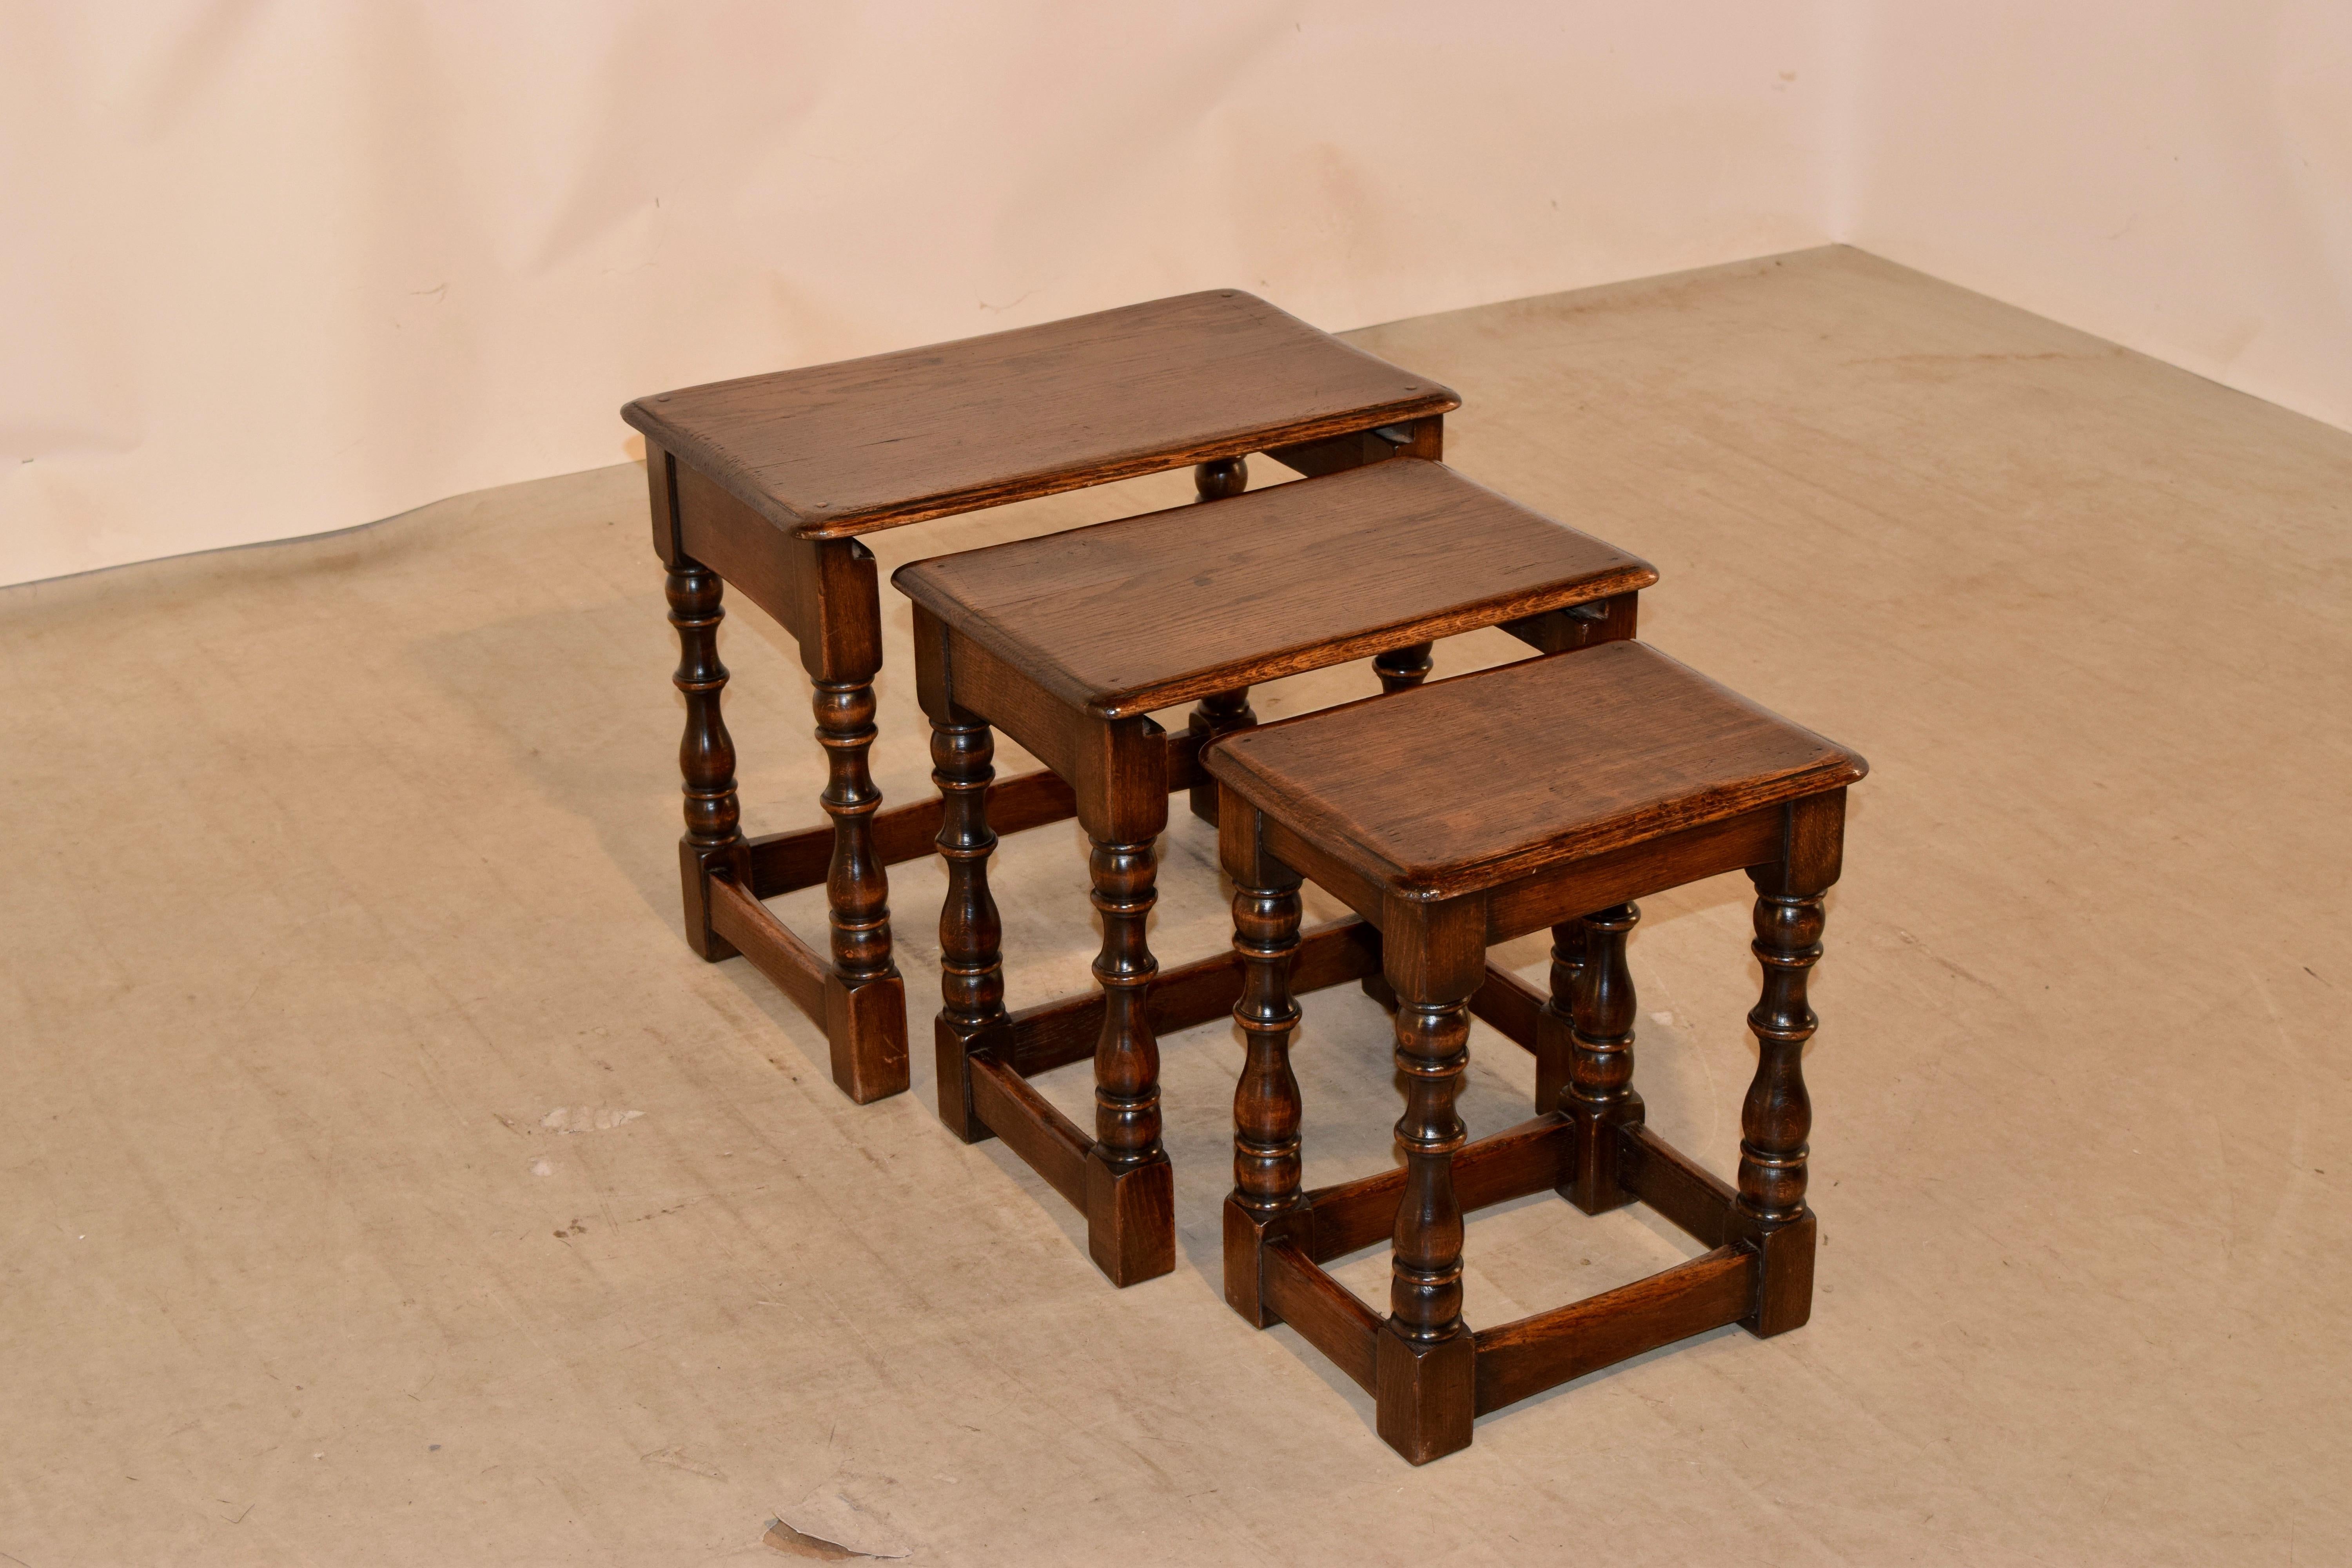 Early 20th Century Nest of Three Tables, circa 1900